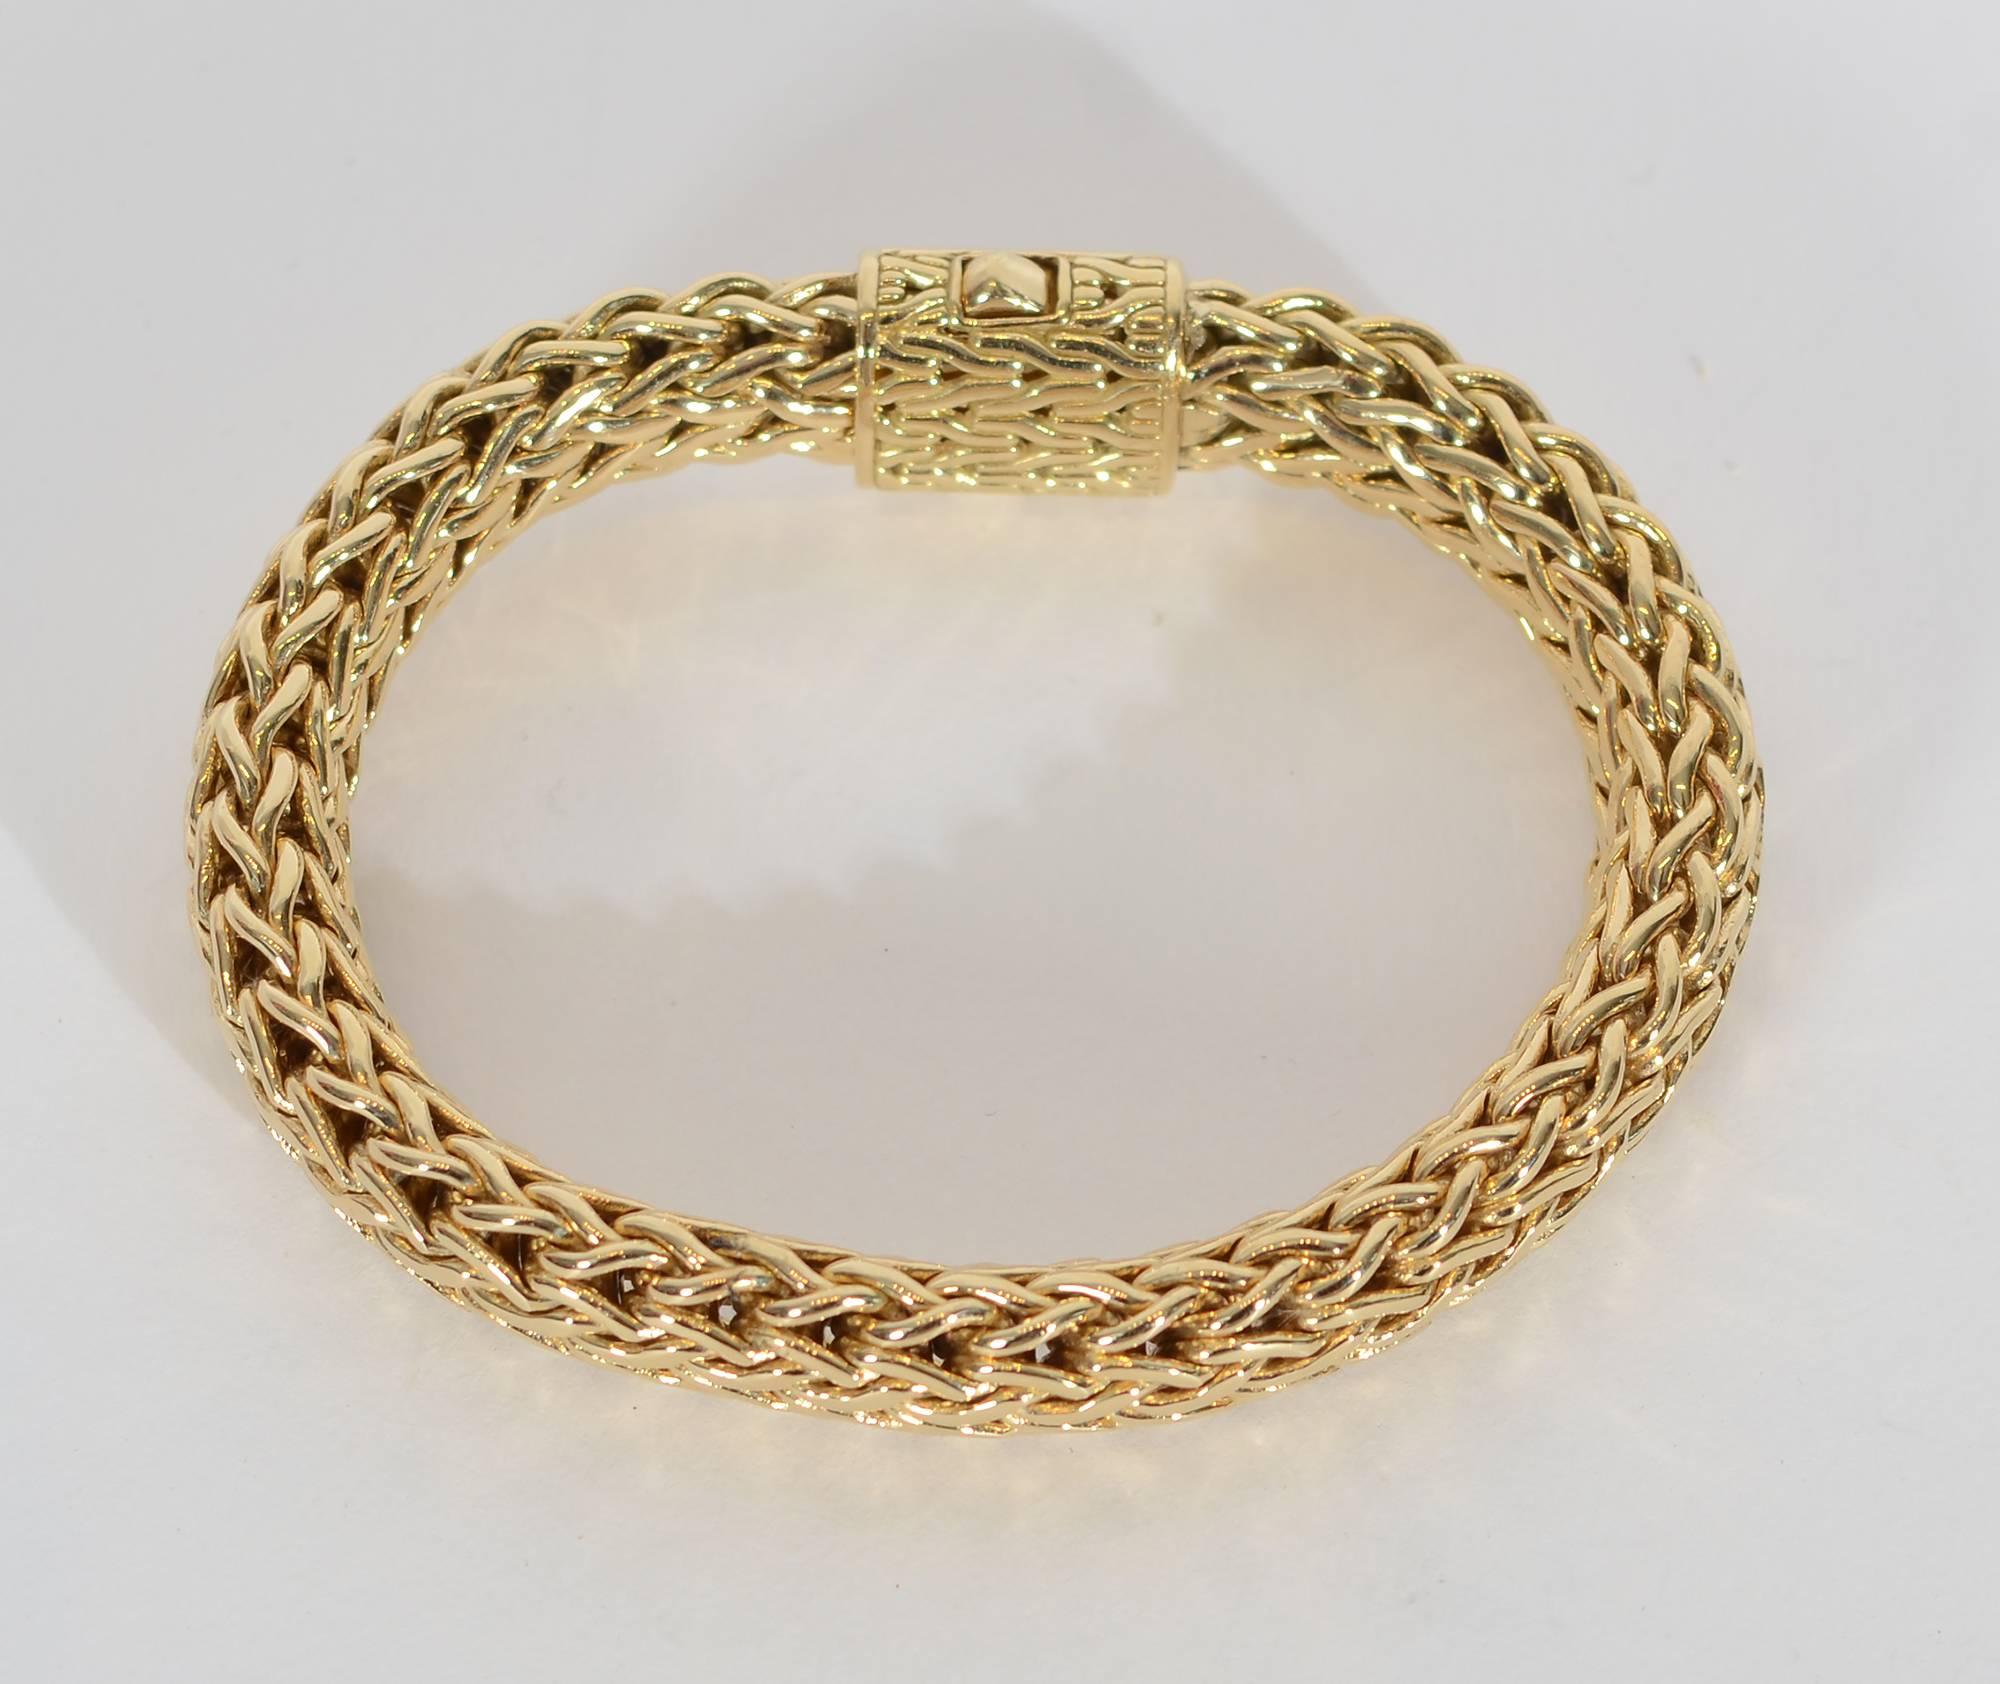 This 18 karat gold bracelet has an wonderfully complex weave.  It weighs a substantial 96 grams.
The clasp is well integrated into the design so it can be work on top of the wrist as an ornamental form or in the back in the more traditional way. It